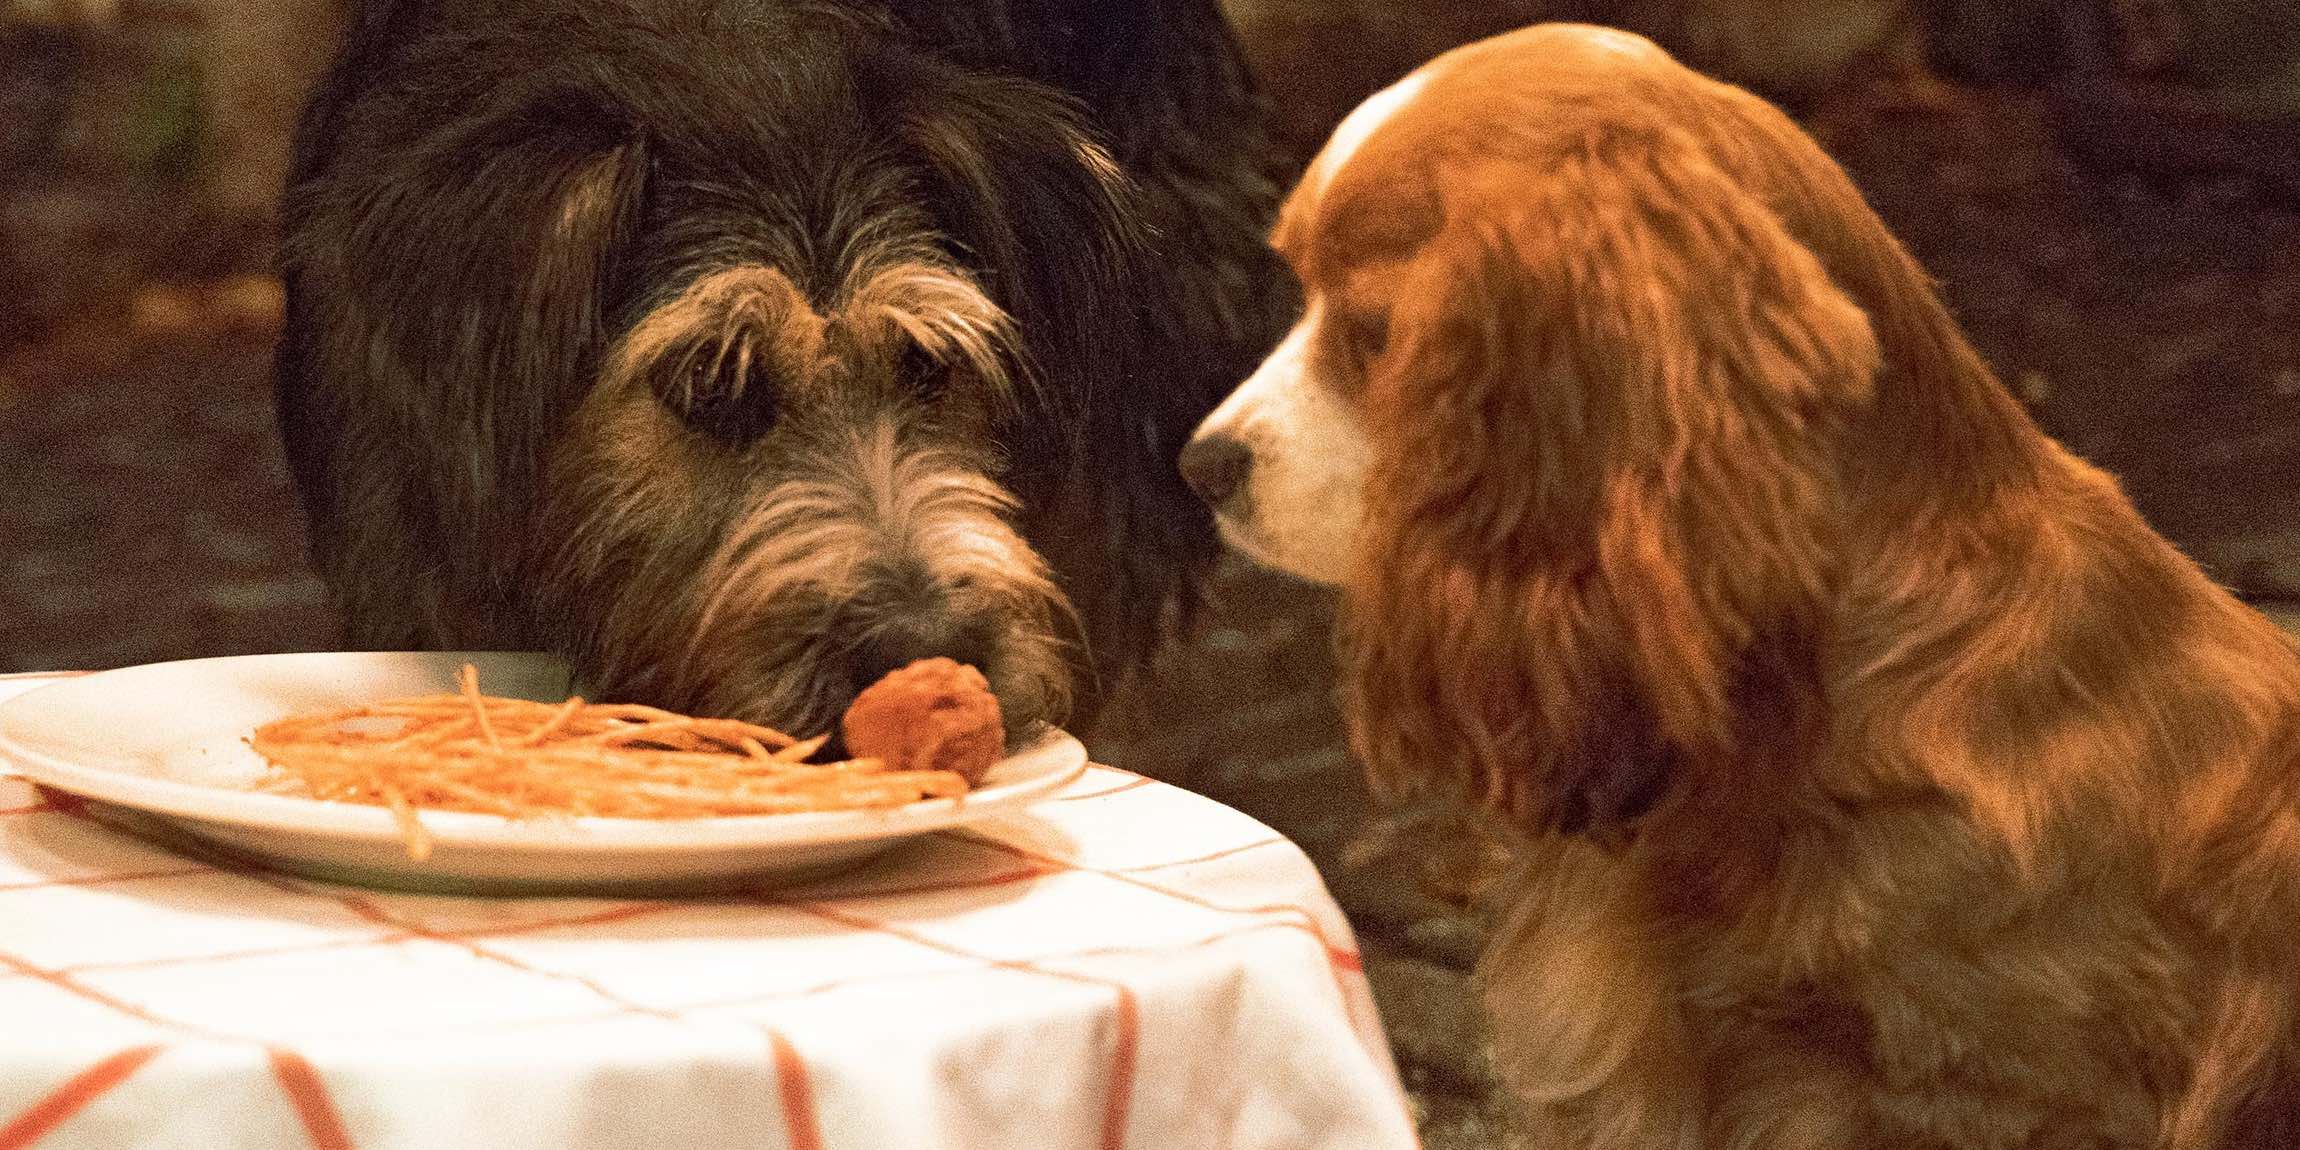 Lady & The Tramp 2019’s Biggest Changes To The Original